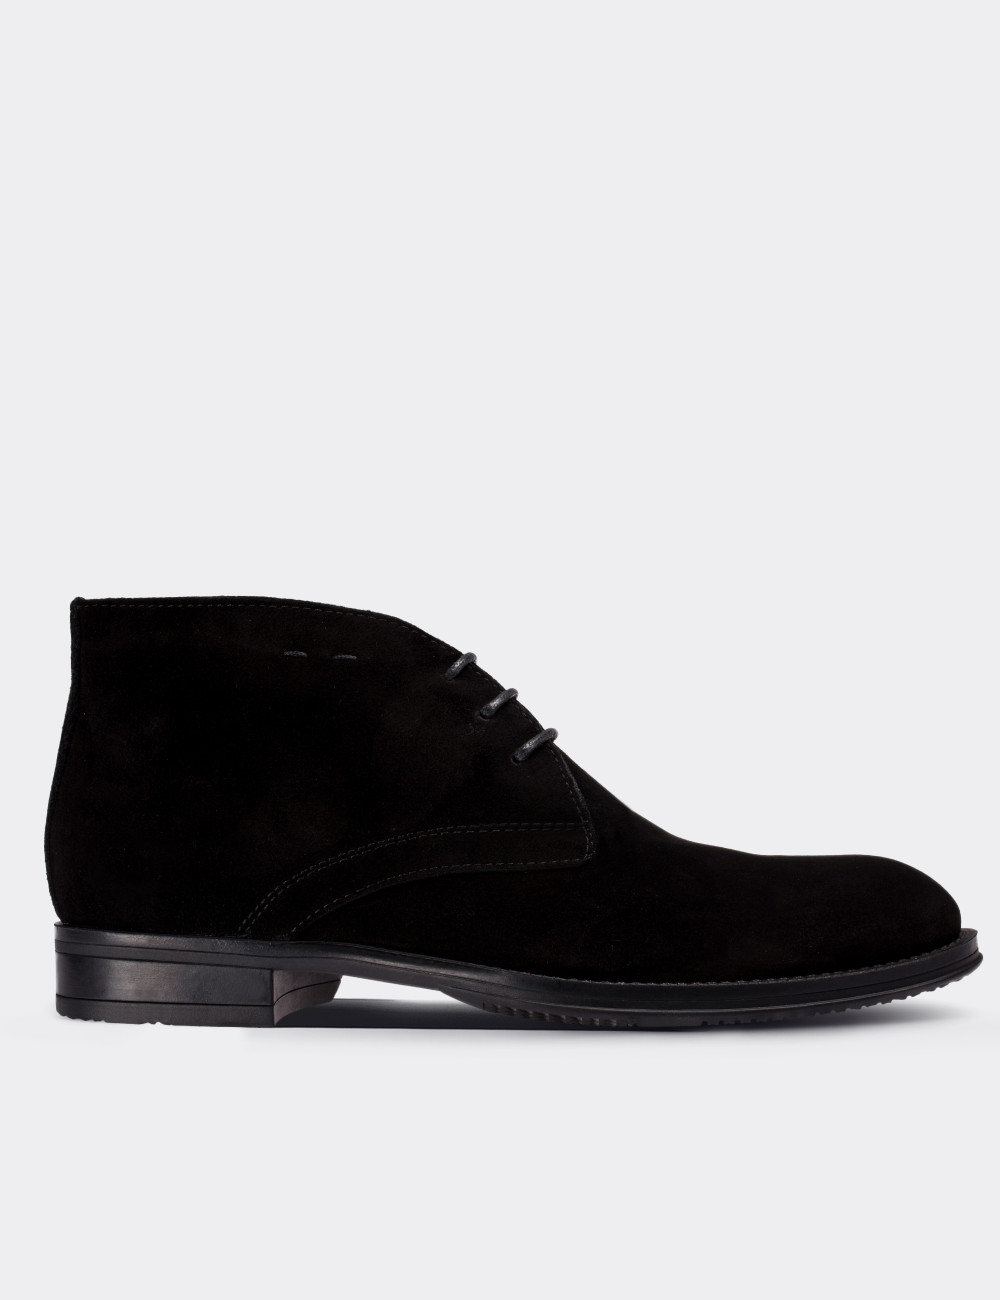 Black Suede Leather Desert Boots - 01295MSYHC04